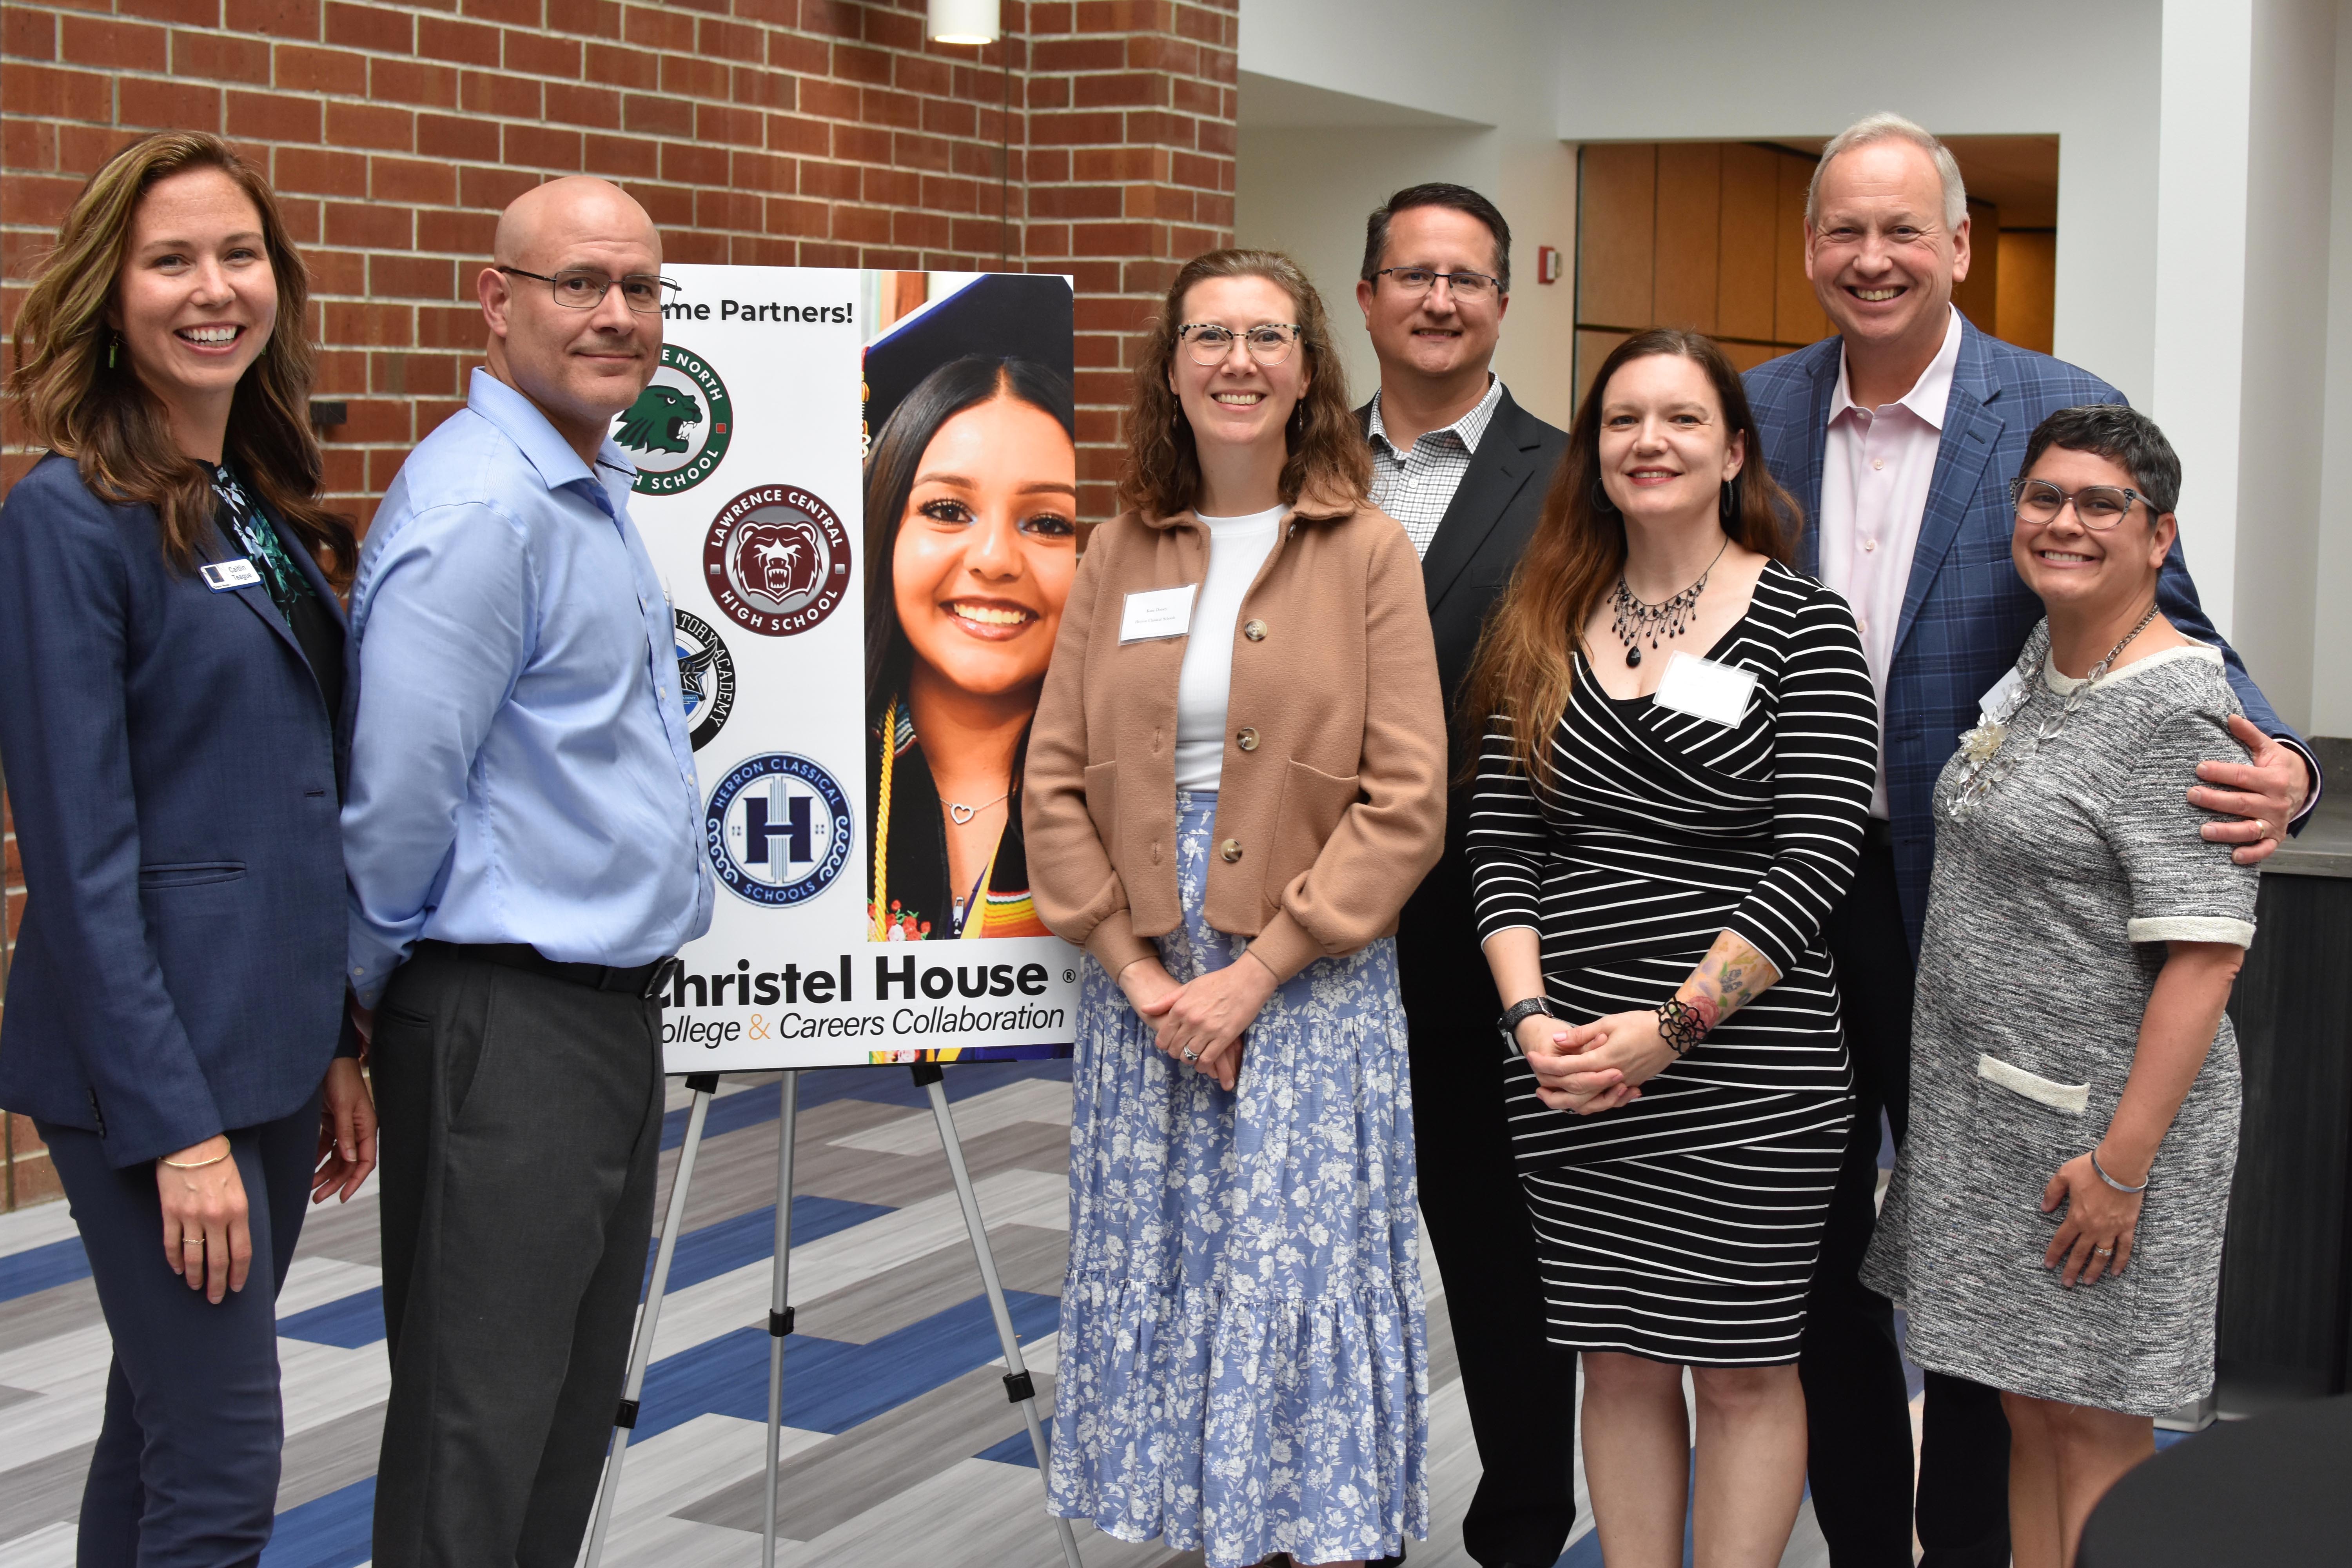 Partners in the Christel House College and Careers Collaboration in Indianapolis